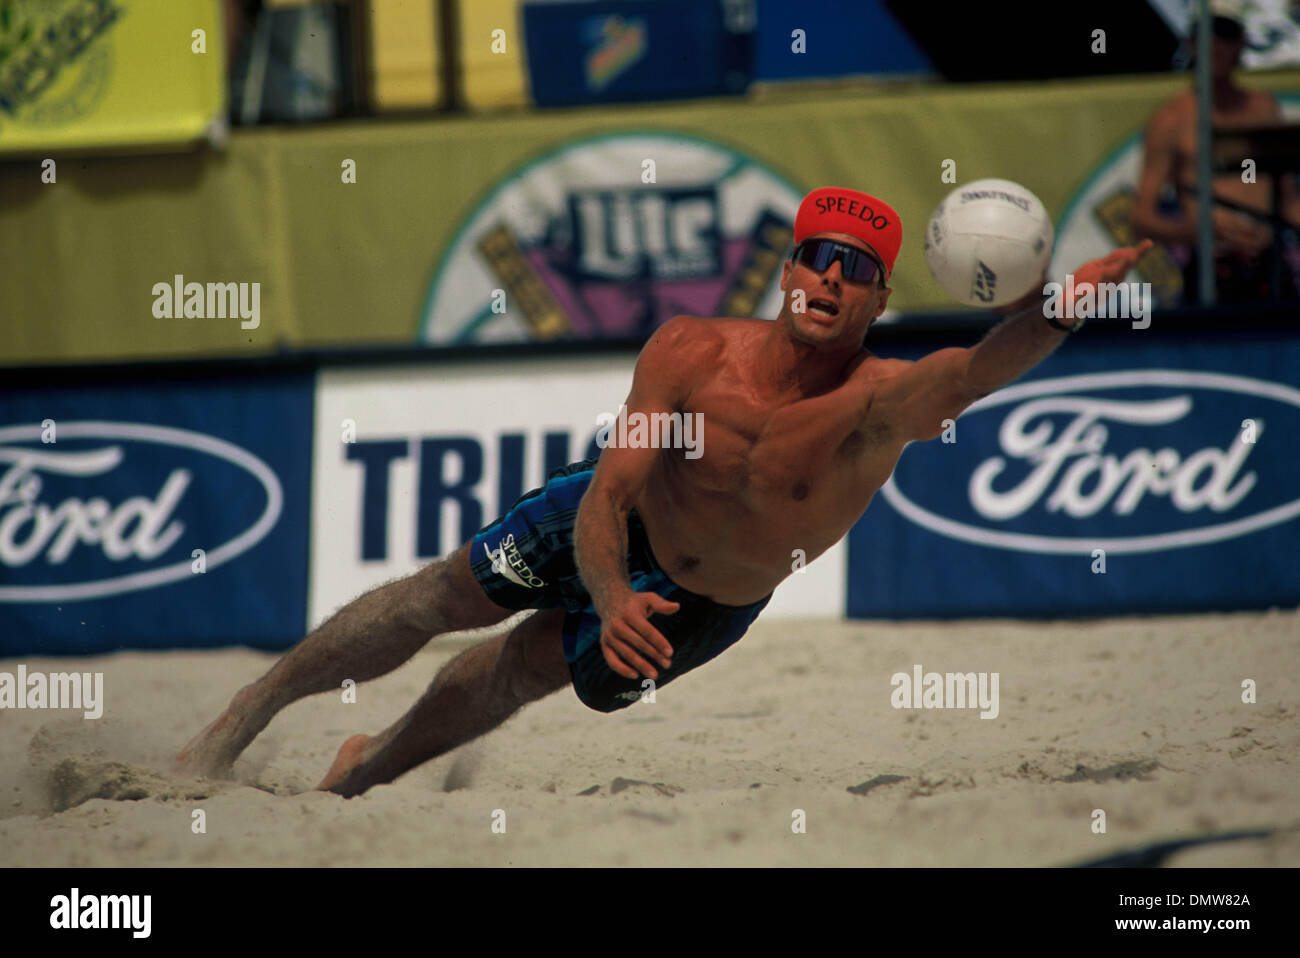 Aug 05, 1995; Dallas/Ft Worth, NY, USA; (File Photo 1995. Exact Date Unknown) KARCH KIRALY at the AVP Professional Beach Volleyball  - Dallas/Ft Worth, TX - 1995. Stock Photo